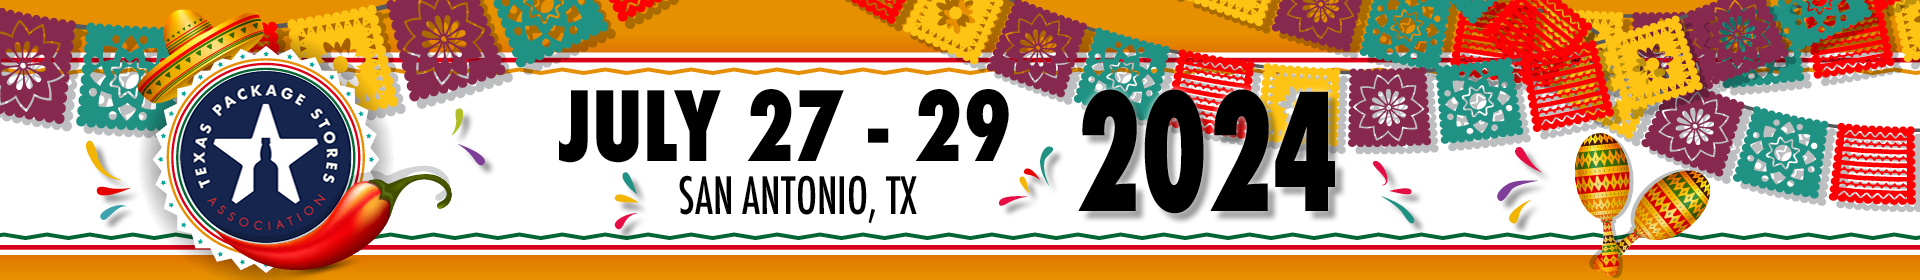 77th Annual TPSA Convention & Trade Show Event Banner